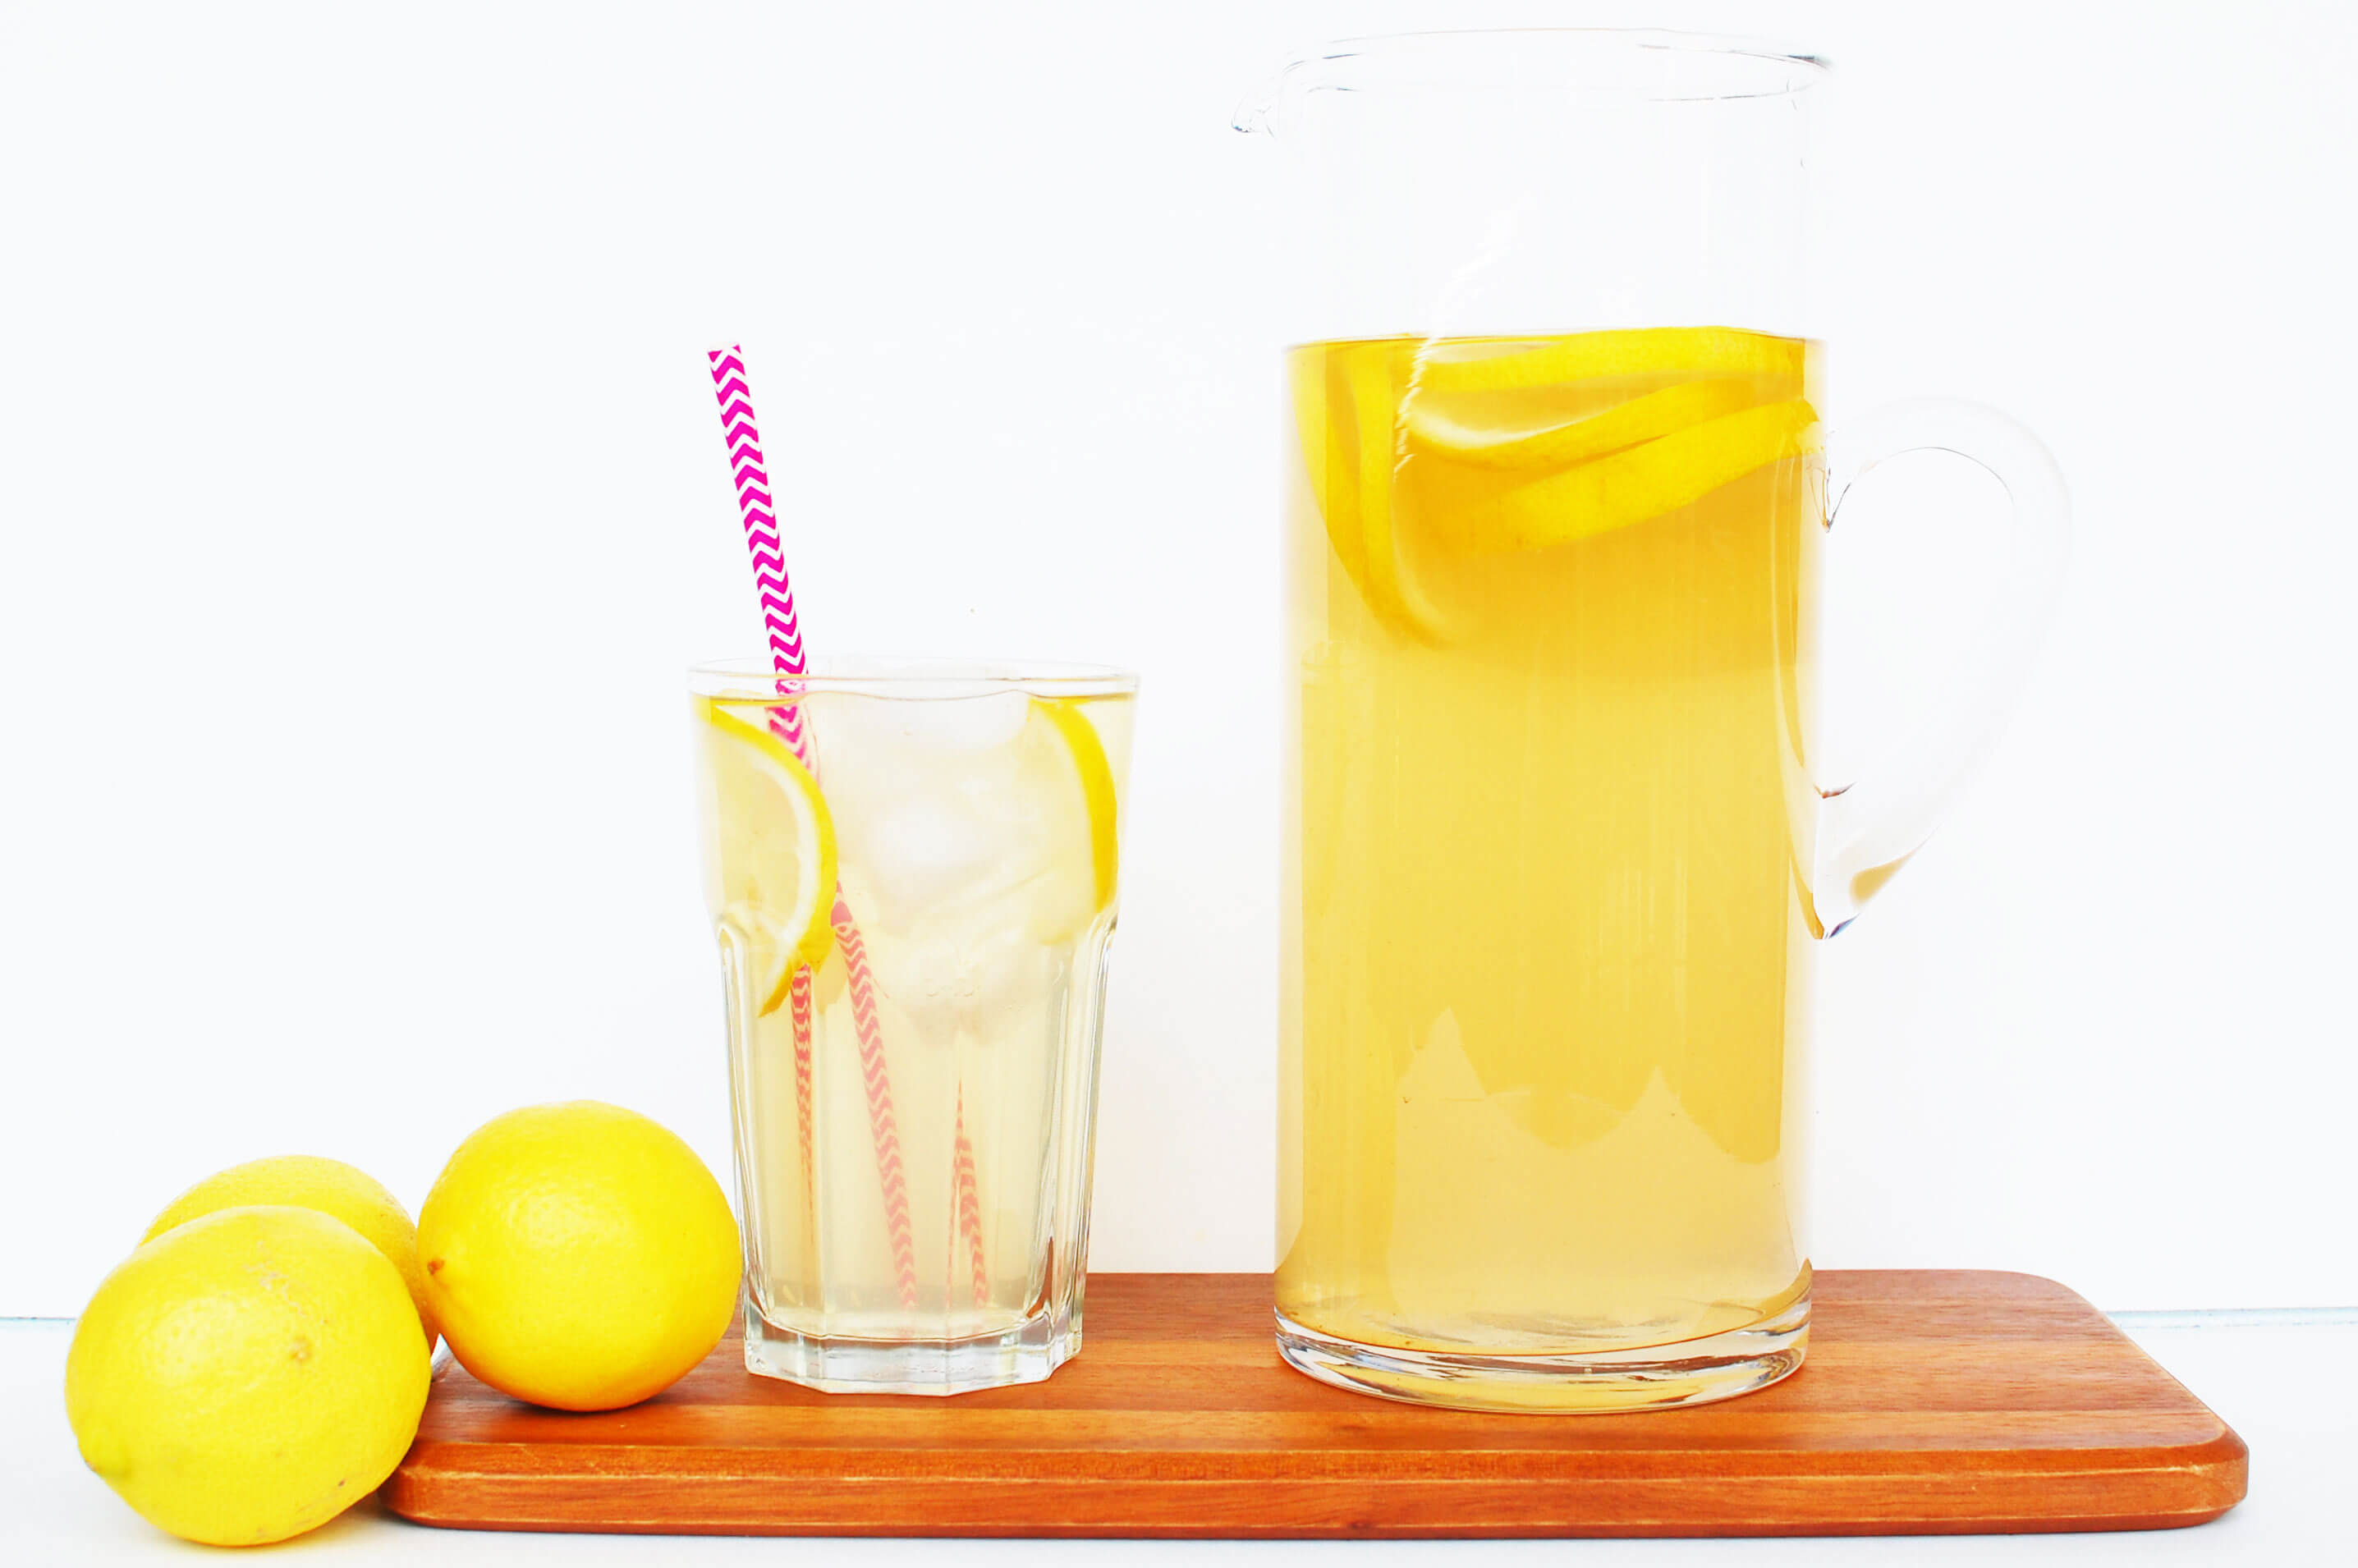 20 Low Oxalate Meals Your Clients Will Love: Iced Green Tea Lemonade